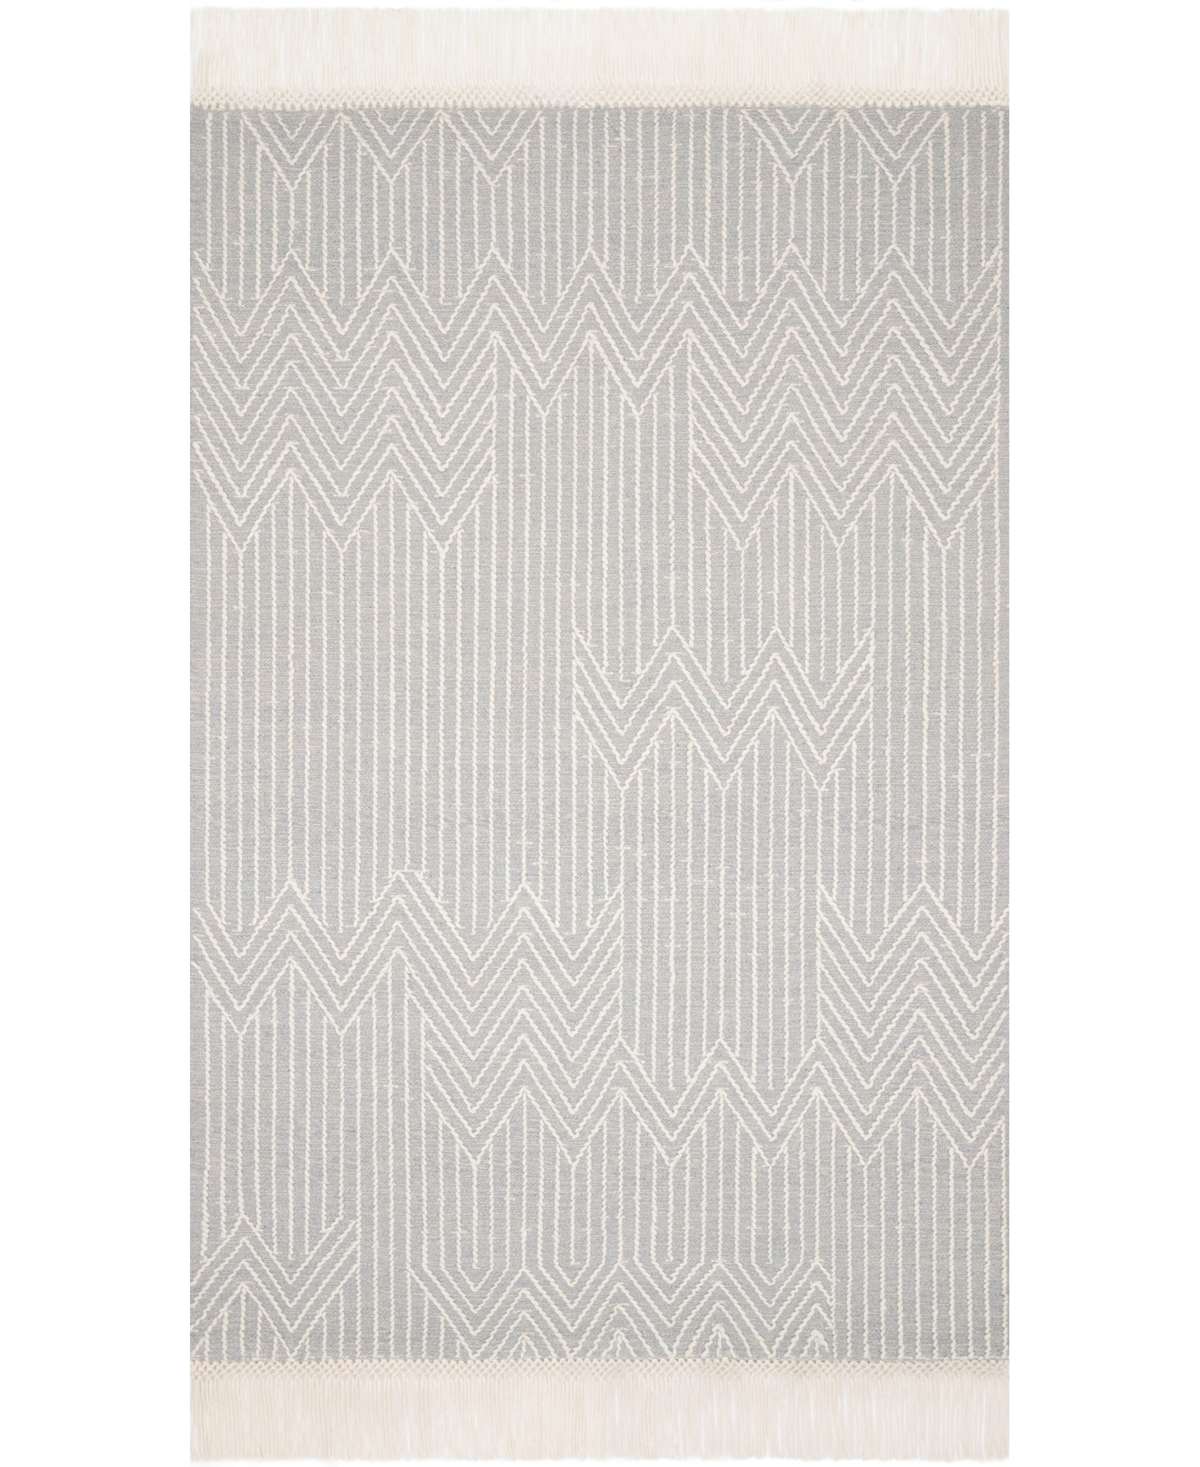 Magnolia Home By Joanna Gaines X Loloi Newton Net-02 7'9" X 9'9" Area Rug In Silver